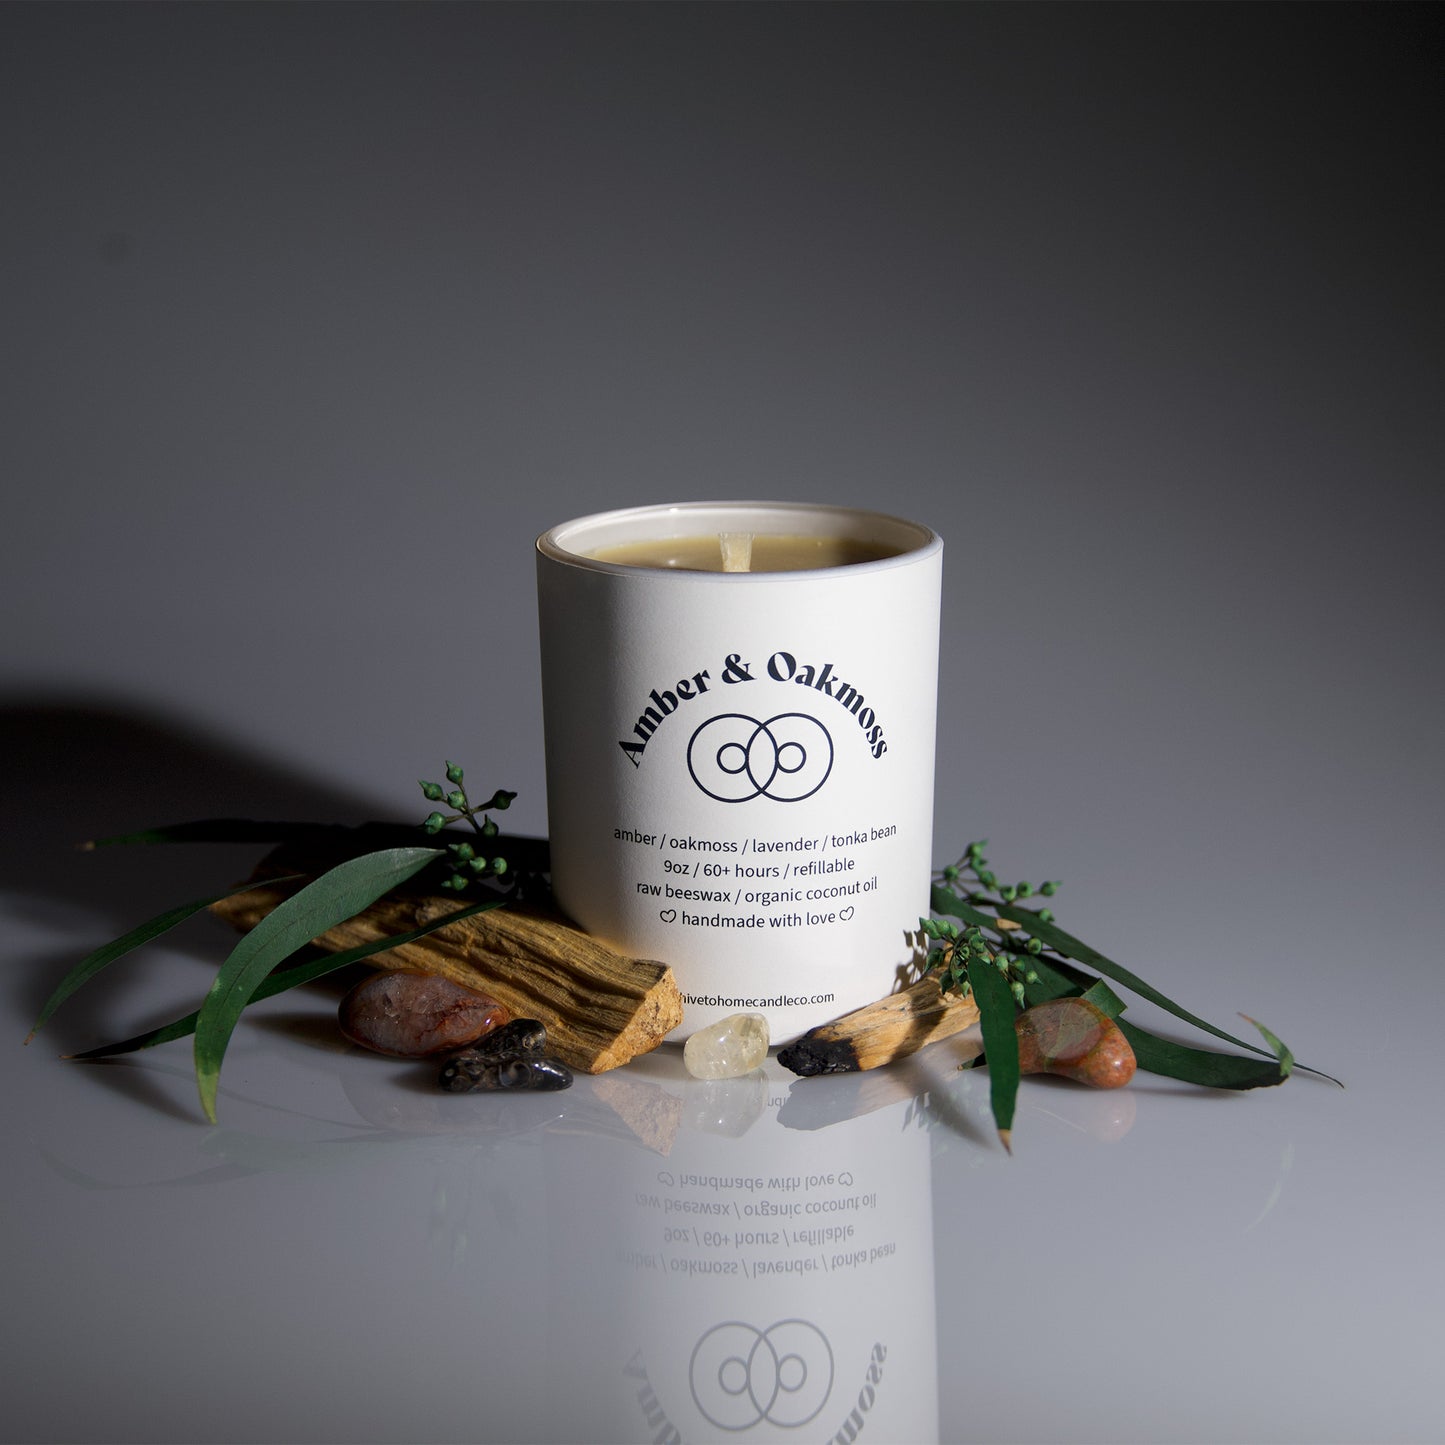 Scented Beeswax candle with notes of amber, oak moss, lavender, and tonka bean. Perfect 9 oz. white tumbler jar.